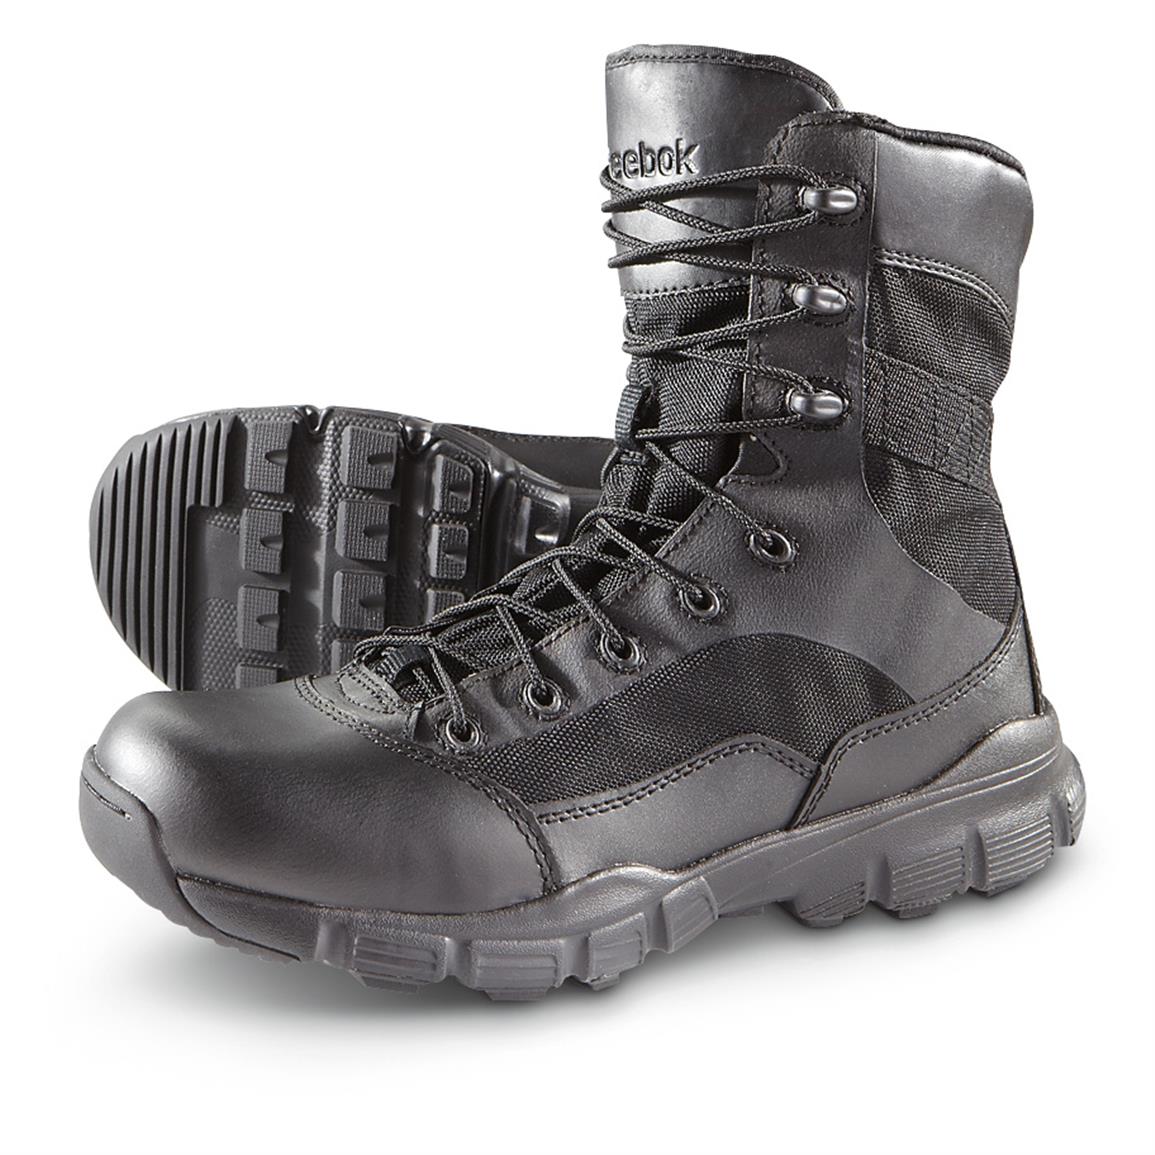 converse tactical boots philippines